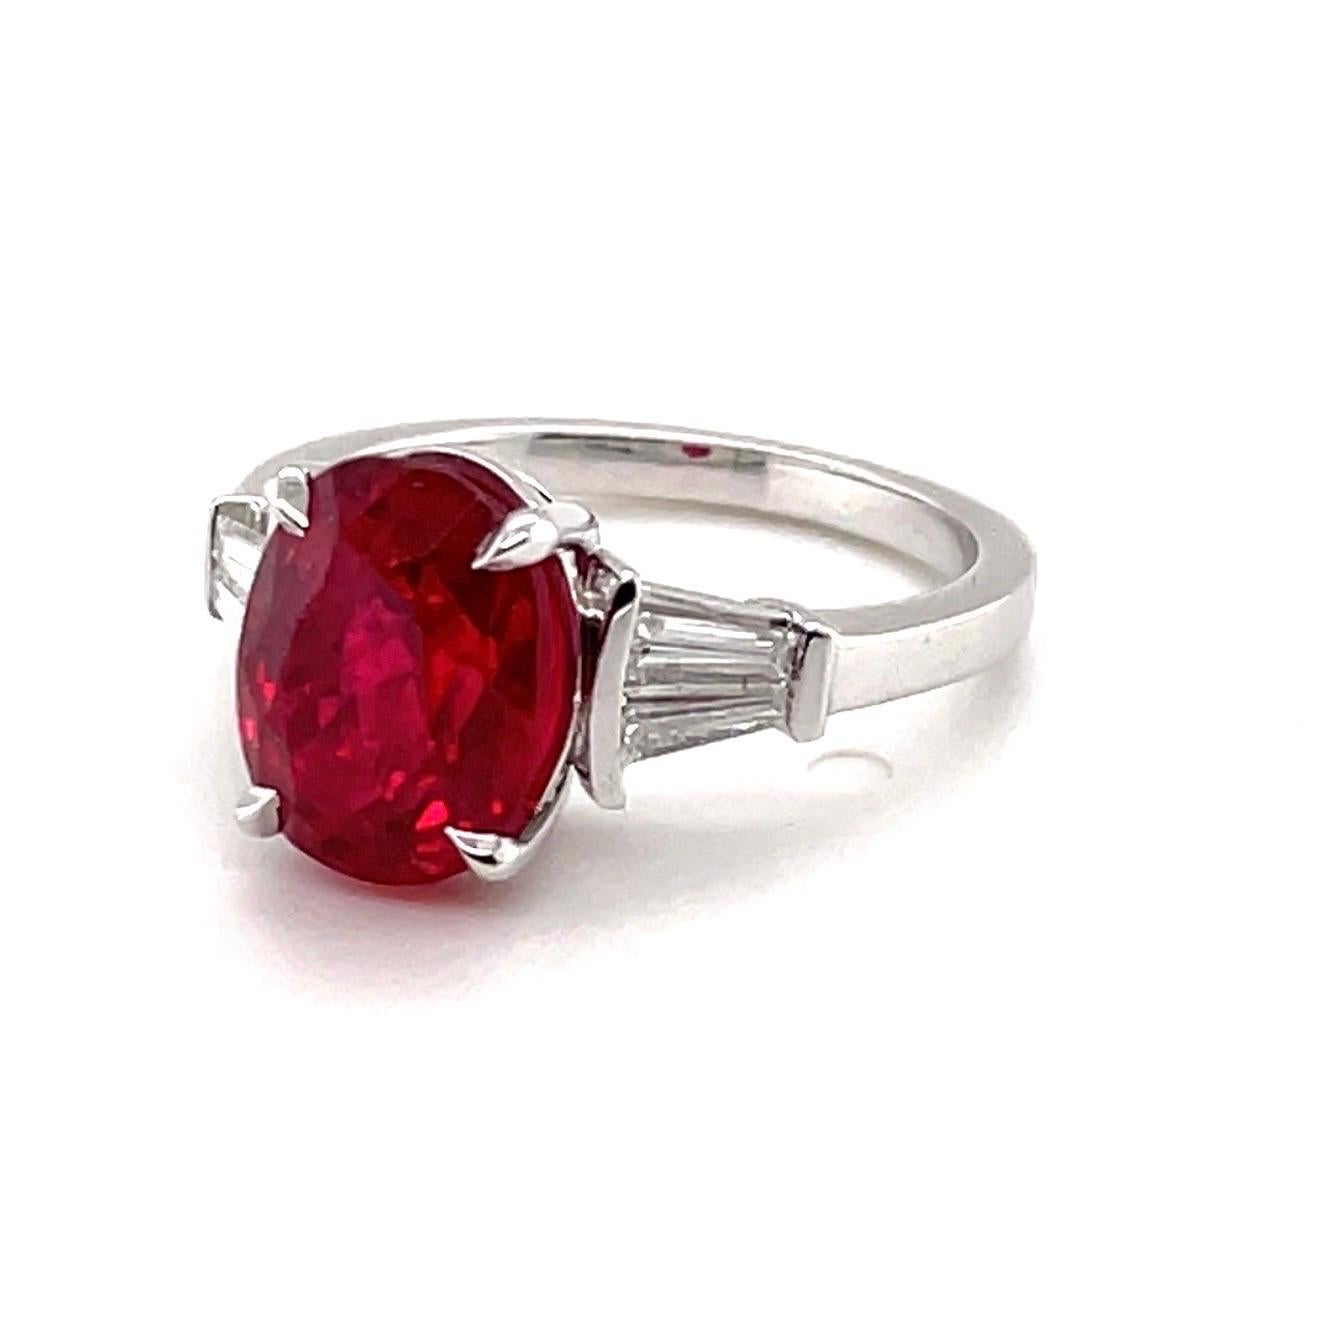 SSEF Certified 3.39 Carats Red Burma Spinel and Diamond 18 Karat White Gold Ring